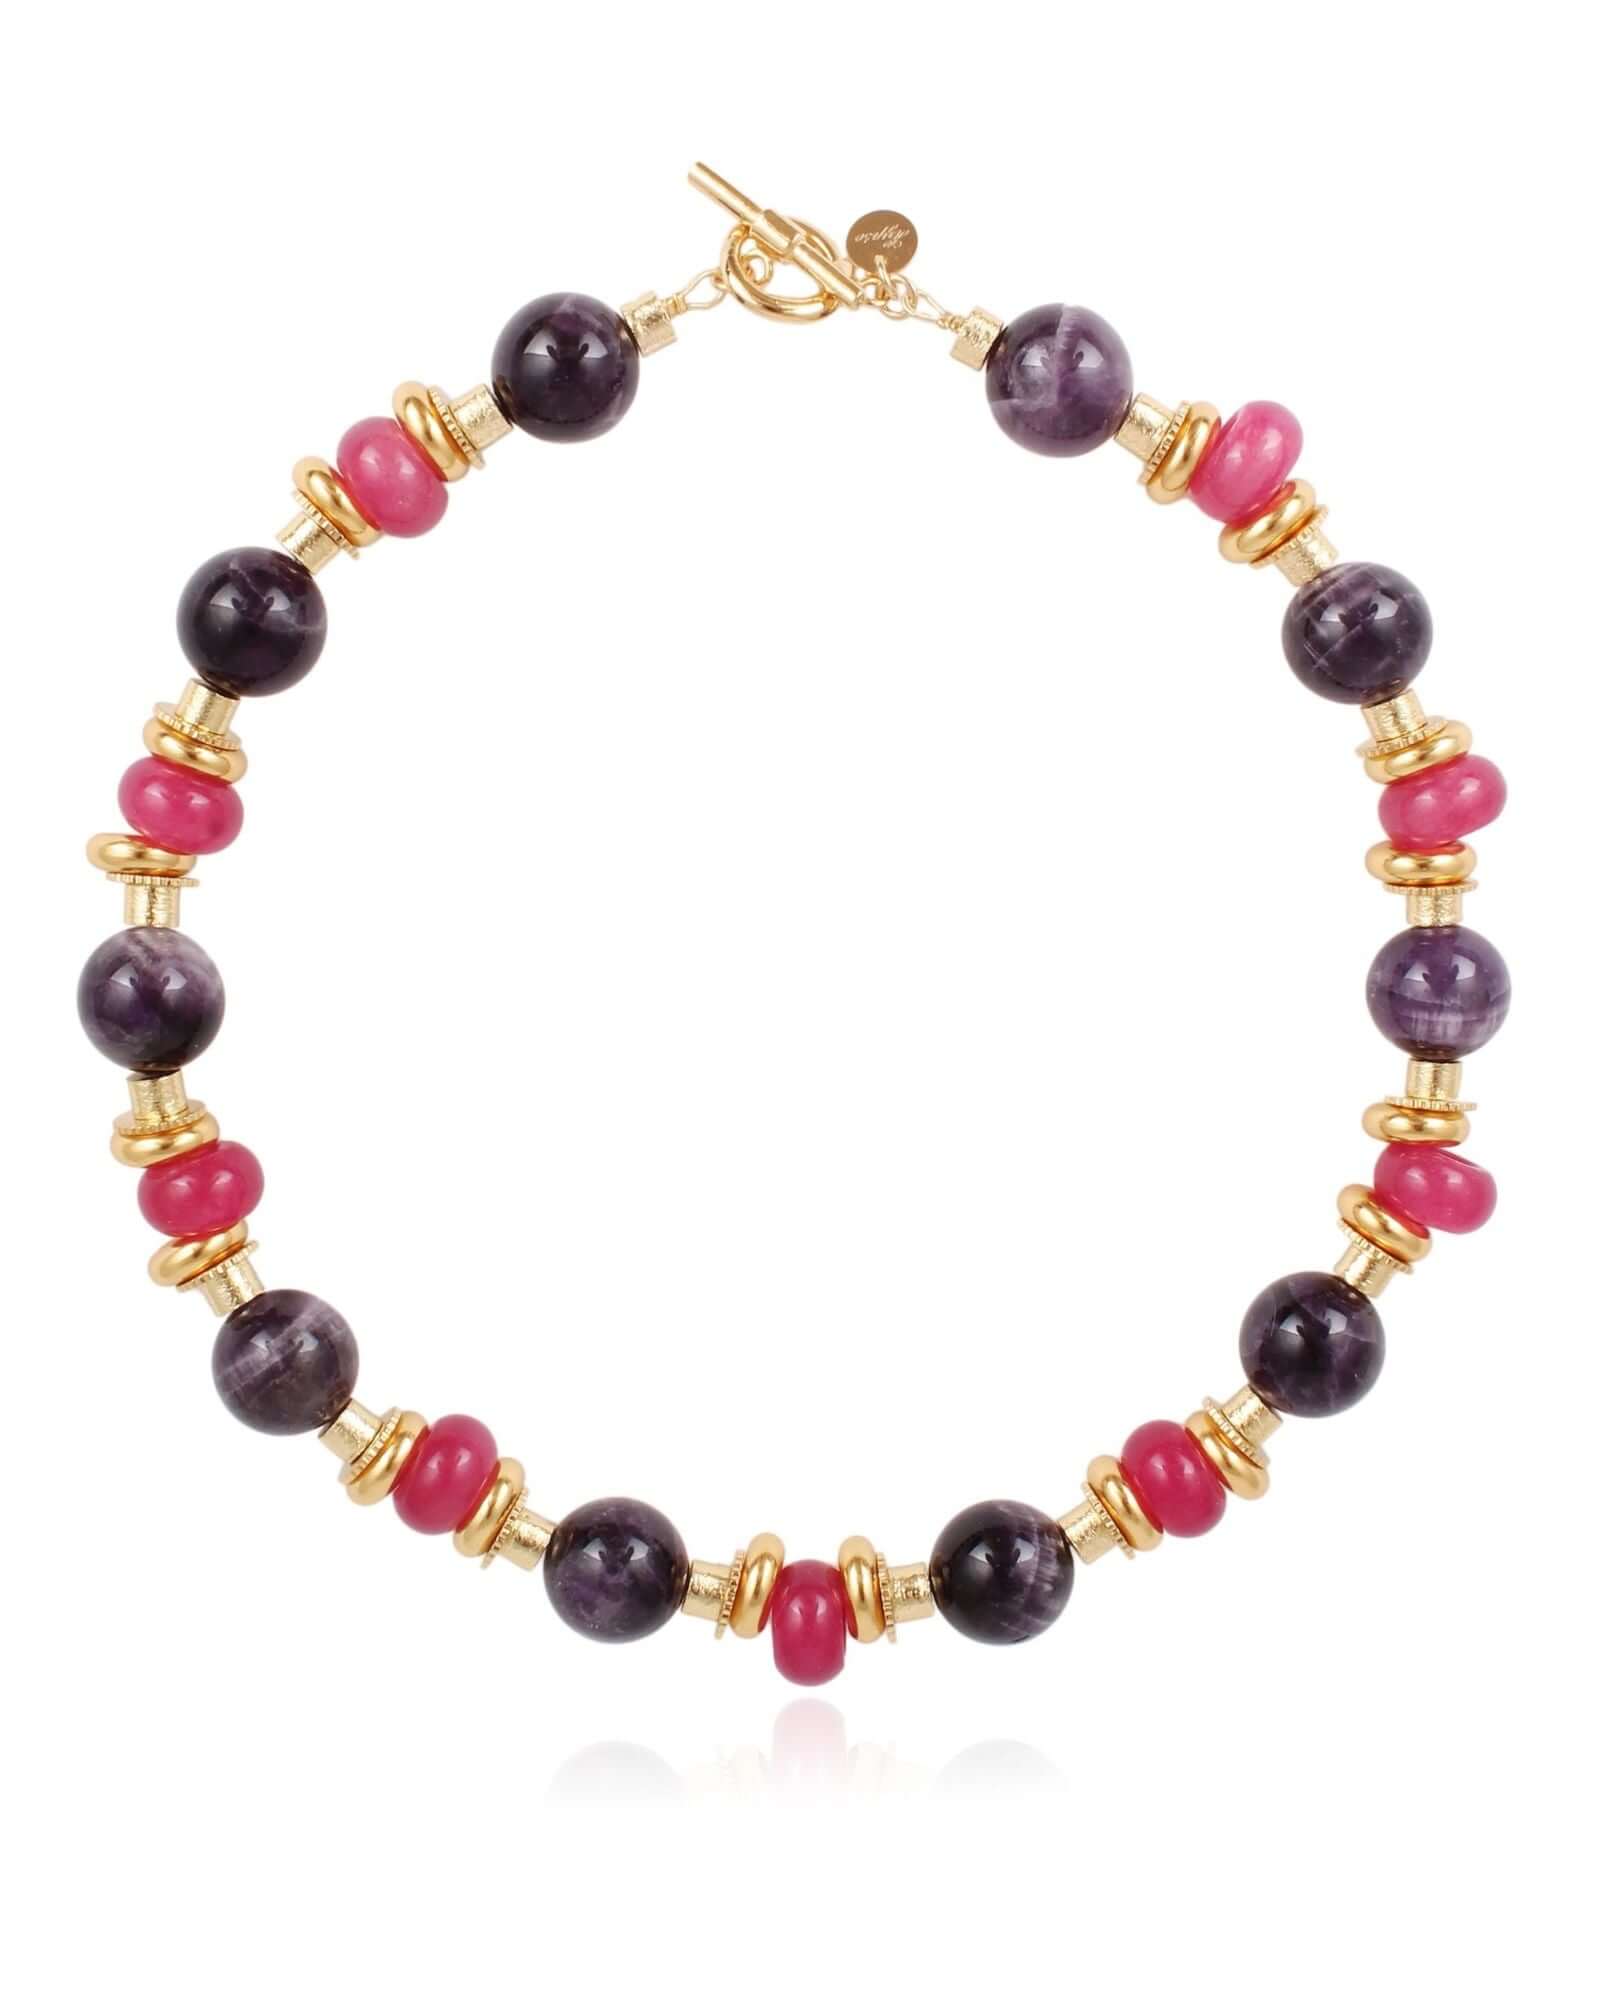 HYPSO PARIS - Amethyst and Pink Agate Beads Necklace